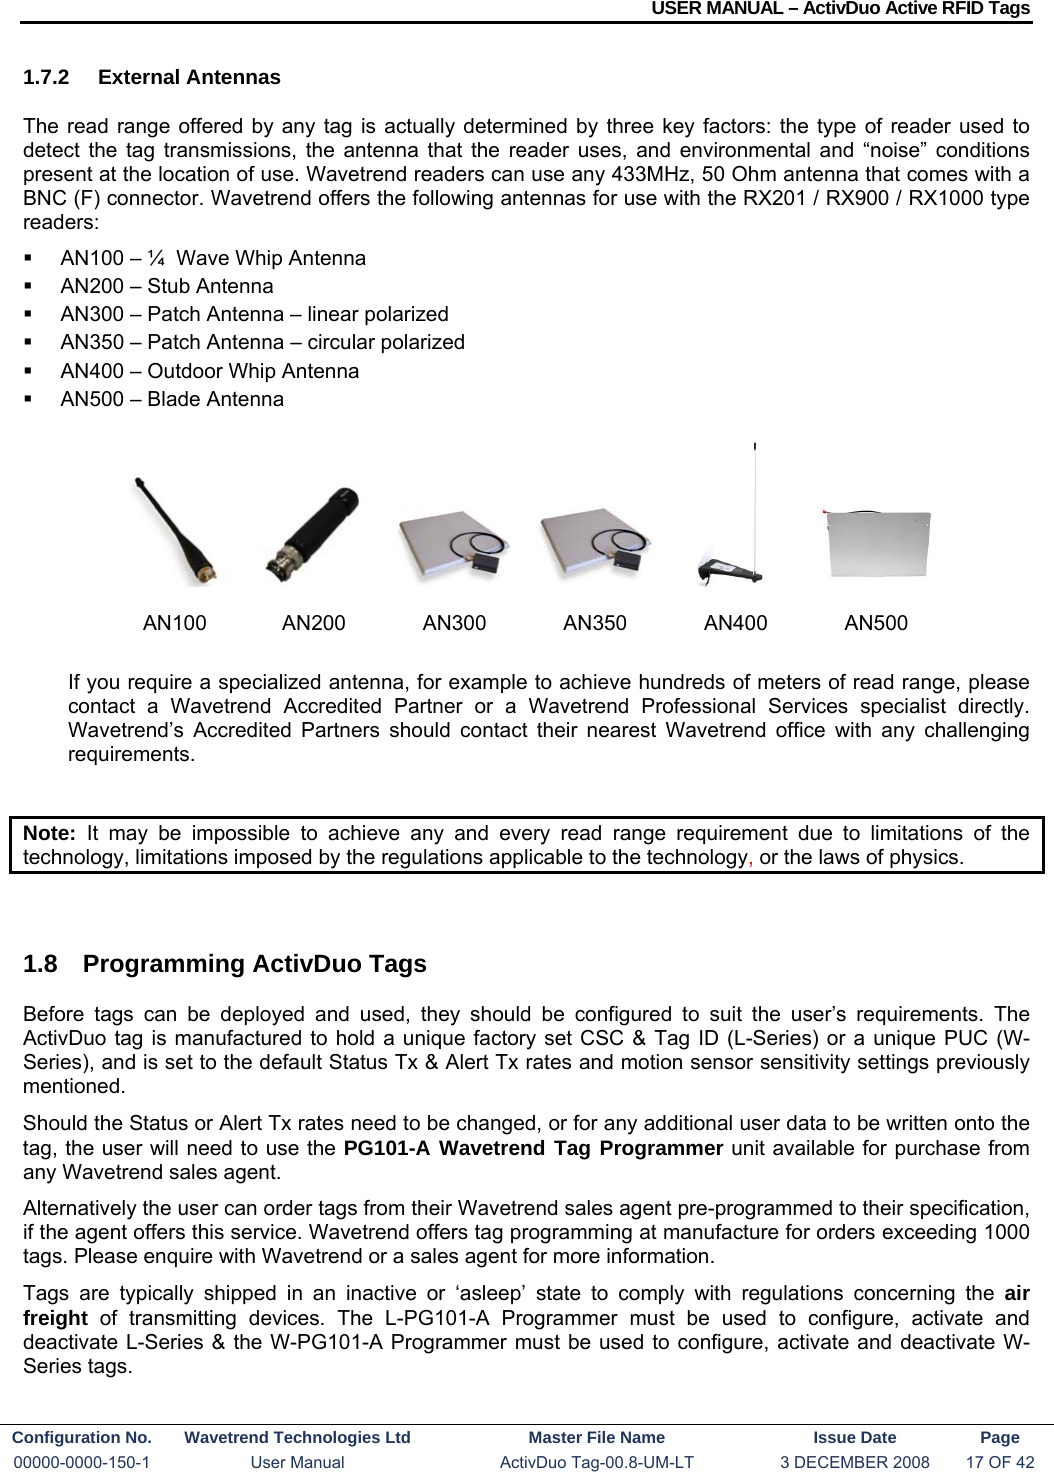 USER MANUAL – ActivDuo Active RFID Tags Configuration No.  Wavetrend Technologies Ltd  Master File Name   Issue Date  Page 00000-0000-150-1  User Manual  ActivDuo Tag-00.8-UM-LT  3 DECEMBER 2008  17 OF 42  1.7.2 External Antennas The read range offered by any tag is actually determined by three key factors: the type of reader used to detect the tag transmissions, the antenna that the reader uses, and environmental and “noise” conditions present at the location of use. Wavetrend readers can use any 433MHz, 50 Ohm antenna that comes with a BNC (F) connector. Wavetrend offers the following antennas for use with the RX201 / RX900 / RX1000 type readers:   AN100 – ¼  Wave Whip Antenna   AN200 – Stub Antenna   AN300 – Patch Antenna – linear polarized   AN350 – Patch Antenna – circular polarized   AN400 – Outdoor Whip Antenna   AN500 – Blade Antenna        If you require a specialized antenna, for example to achieve hundreds of meters of read range, please contact a Wavetrend Accredited Partner or a Wavetrend Professional Services specialist directly. Wavetrend’s Accredited Partners should contact their nearest Wavetrend office with any challenging requirements.  Note: It may be impossible to achieve any and every read range requirement due to limitations of the technology, limitations imposed by the regulations applicable to the technology, or the laws of physics.  1.8  Programming ActivDuo Tags Before tags can be deployed and used, they should be configured to suit the user’s requirements. The ActivDuo tag is manufactured to hold a unique factory set CSC &amp; Tag ID (L-Series) or a unique PUC (W-Series), and is set to the default Status Tx &amp; Alert Tx rates and motion sensor sensitivity settings previously mentioned. Should the Status or Alert Tx rates need to be changed, or for any additional user data to be written onto the tag, the user will need to use the PG101-A Wavetrend Tag Programmer unit available for purchase from any Wavetrend sales agent. Alternatively the user can order tags from their Wavetrend sales agent pre-programmed to their specification, if the agent offers this service. Wavetrend offers tag programming at manufacture for orders exceeding 1000 tags. Please enquire with Wavetrend or a sales agent for more information. Tags are typically shipped in an inactive or ‘asleep’ state to comply with regulations concerning the air freight of transmitting devices. The L-PG101-A Programmer must be used to configure, activate and deactivate L-Series &amp; the W-PG101-A Programmer must be used to configure, activate and deactivate W-Series tags.       AN100 AN200 AN300 AN350 AN400 AN500 